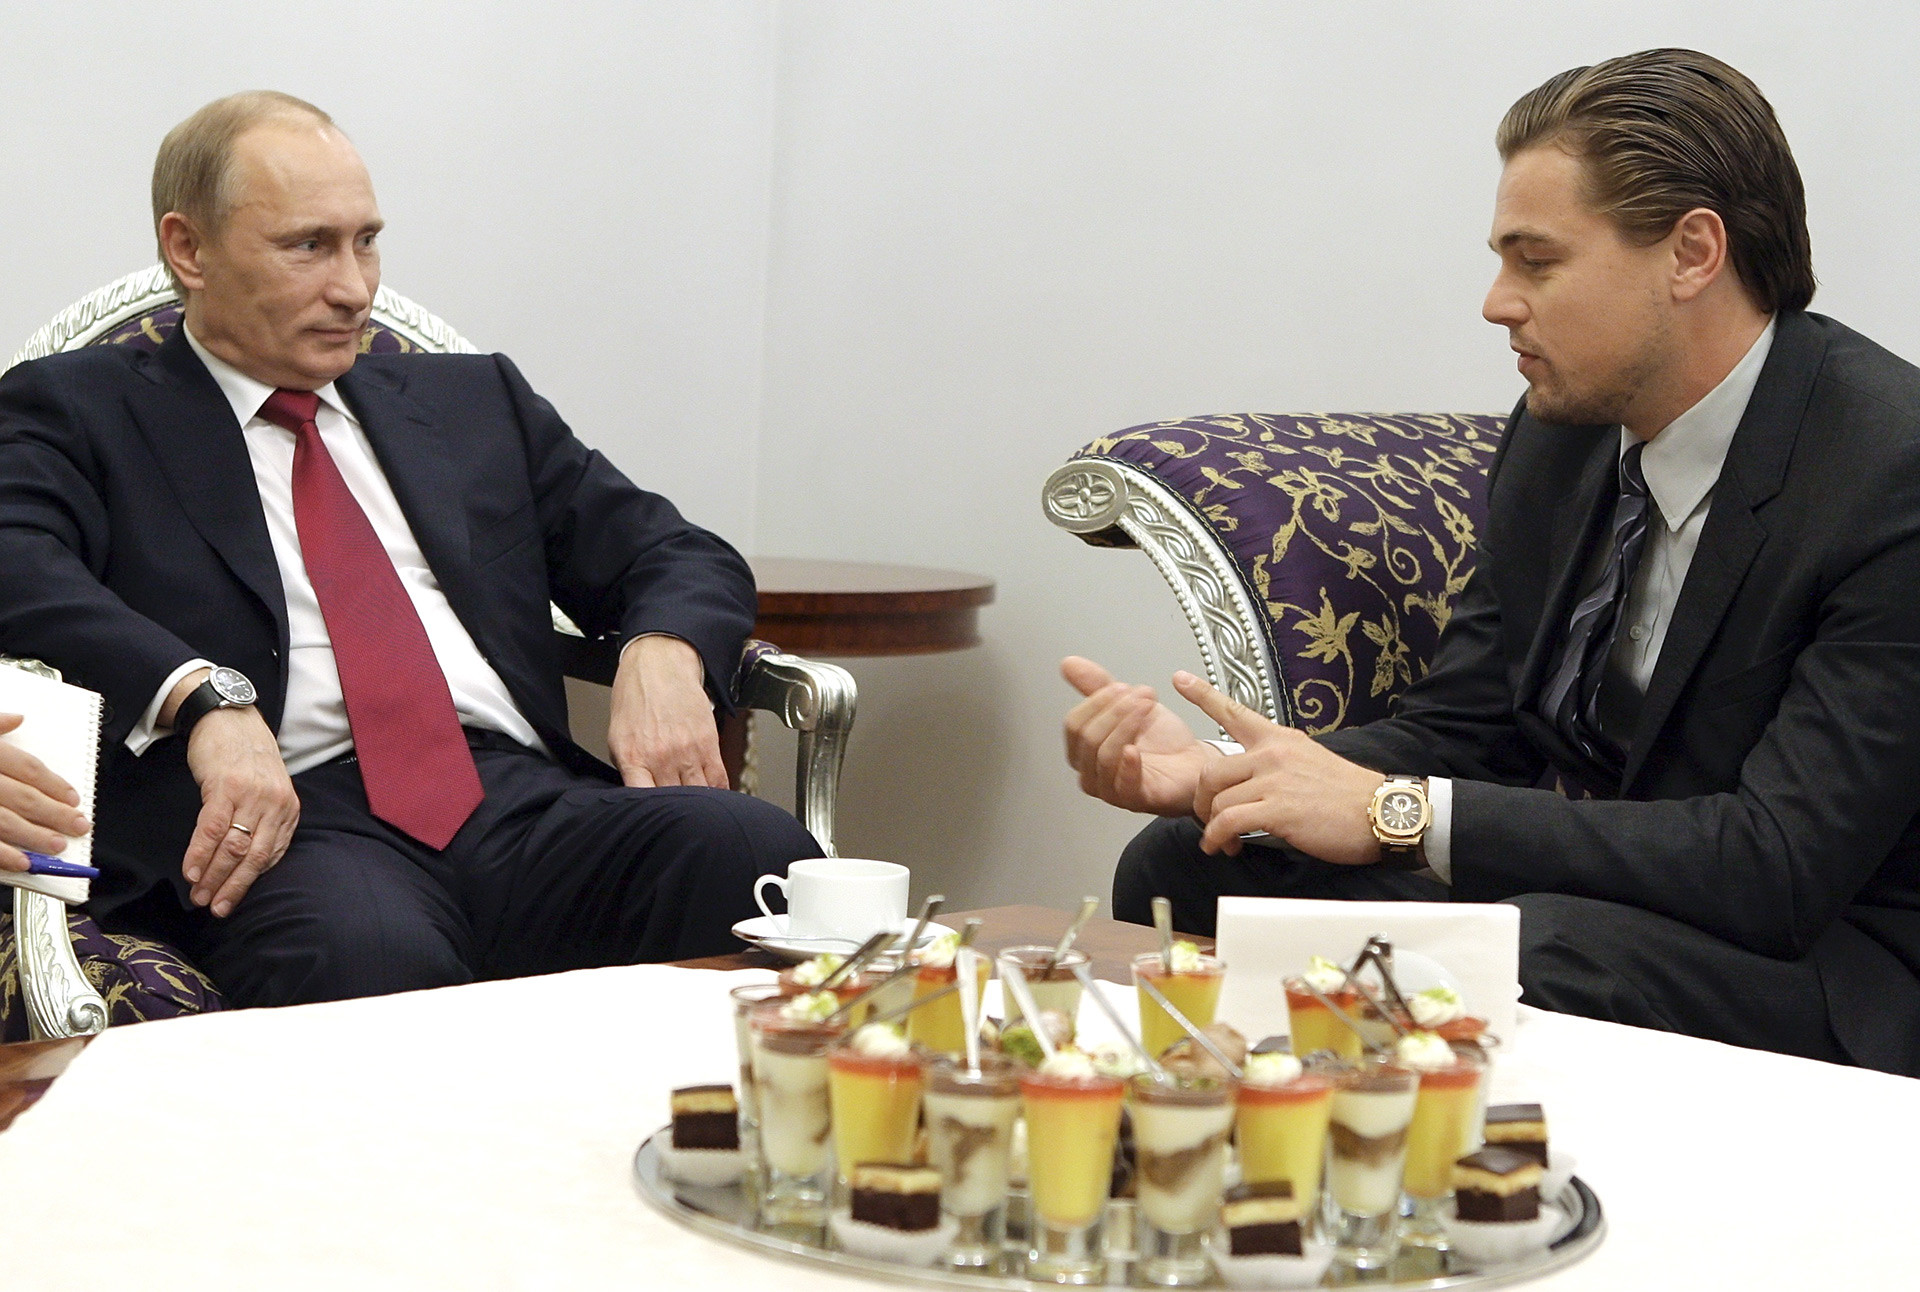 DiCaprio said that he’d also like to play Vladimir Putin, because it is “very, very, very interesting”